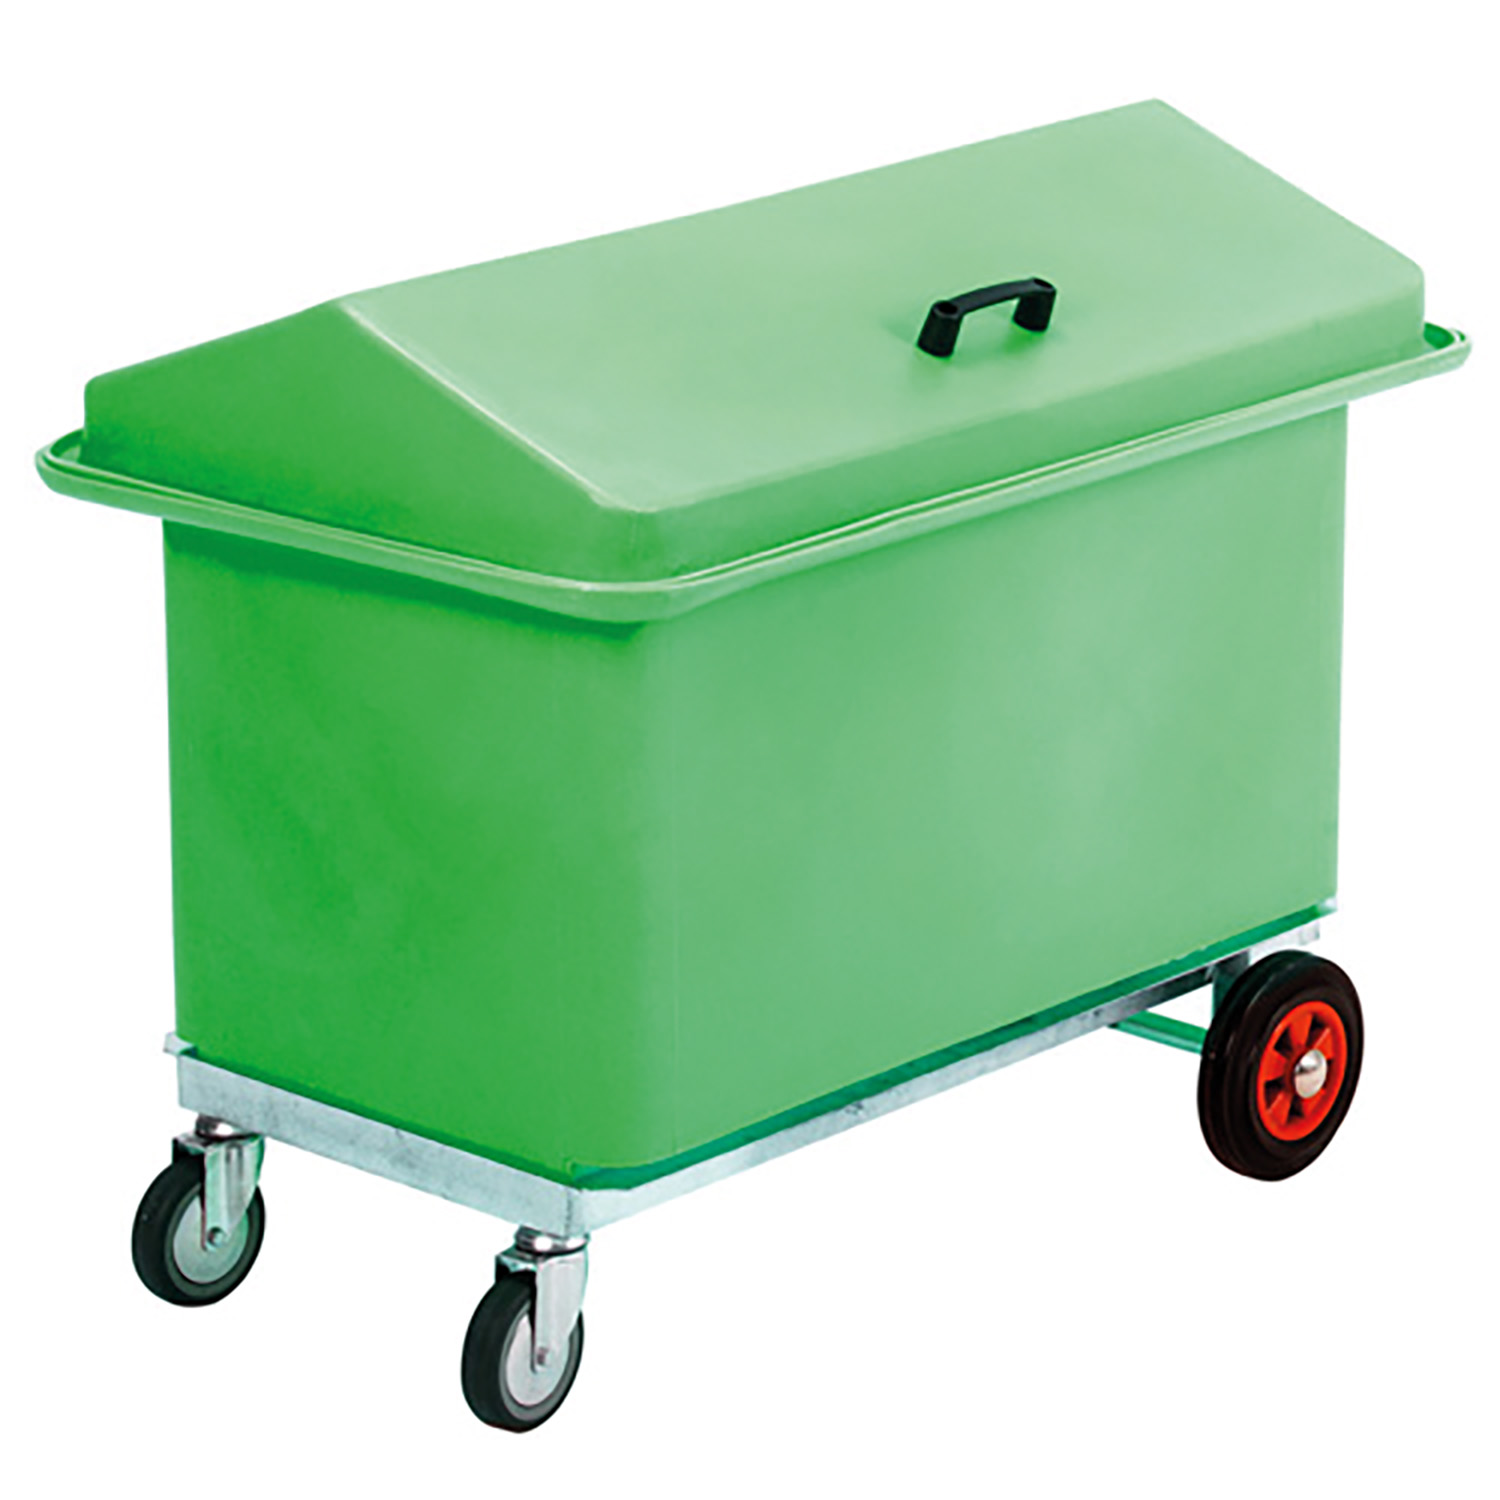 STUBBS MOBILE CHEST ONE COMPARTMENT S58315 GREEN ONE COMPARTMENT MOBILE